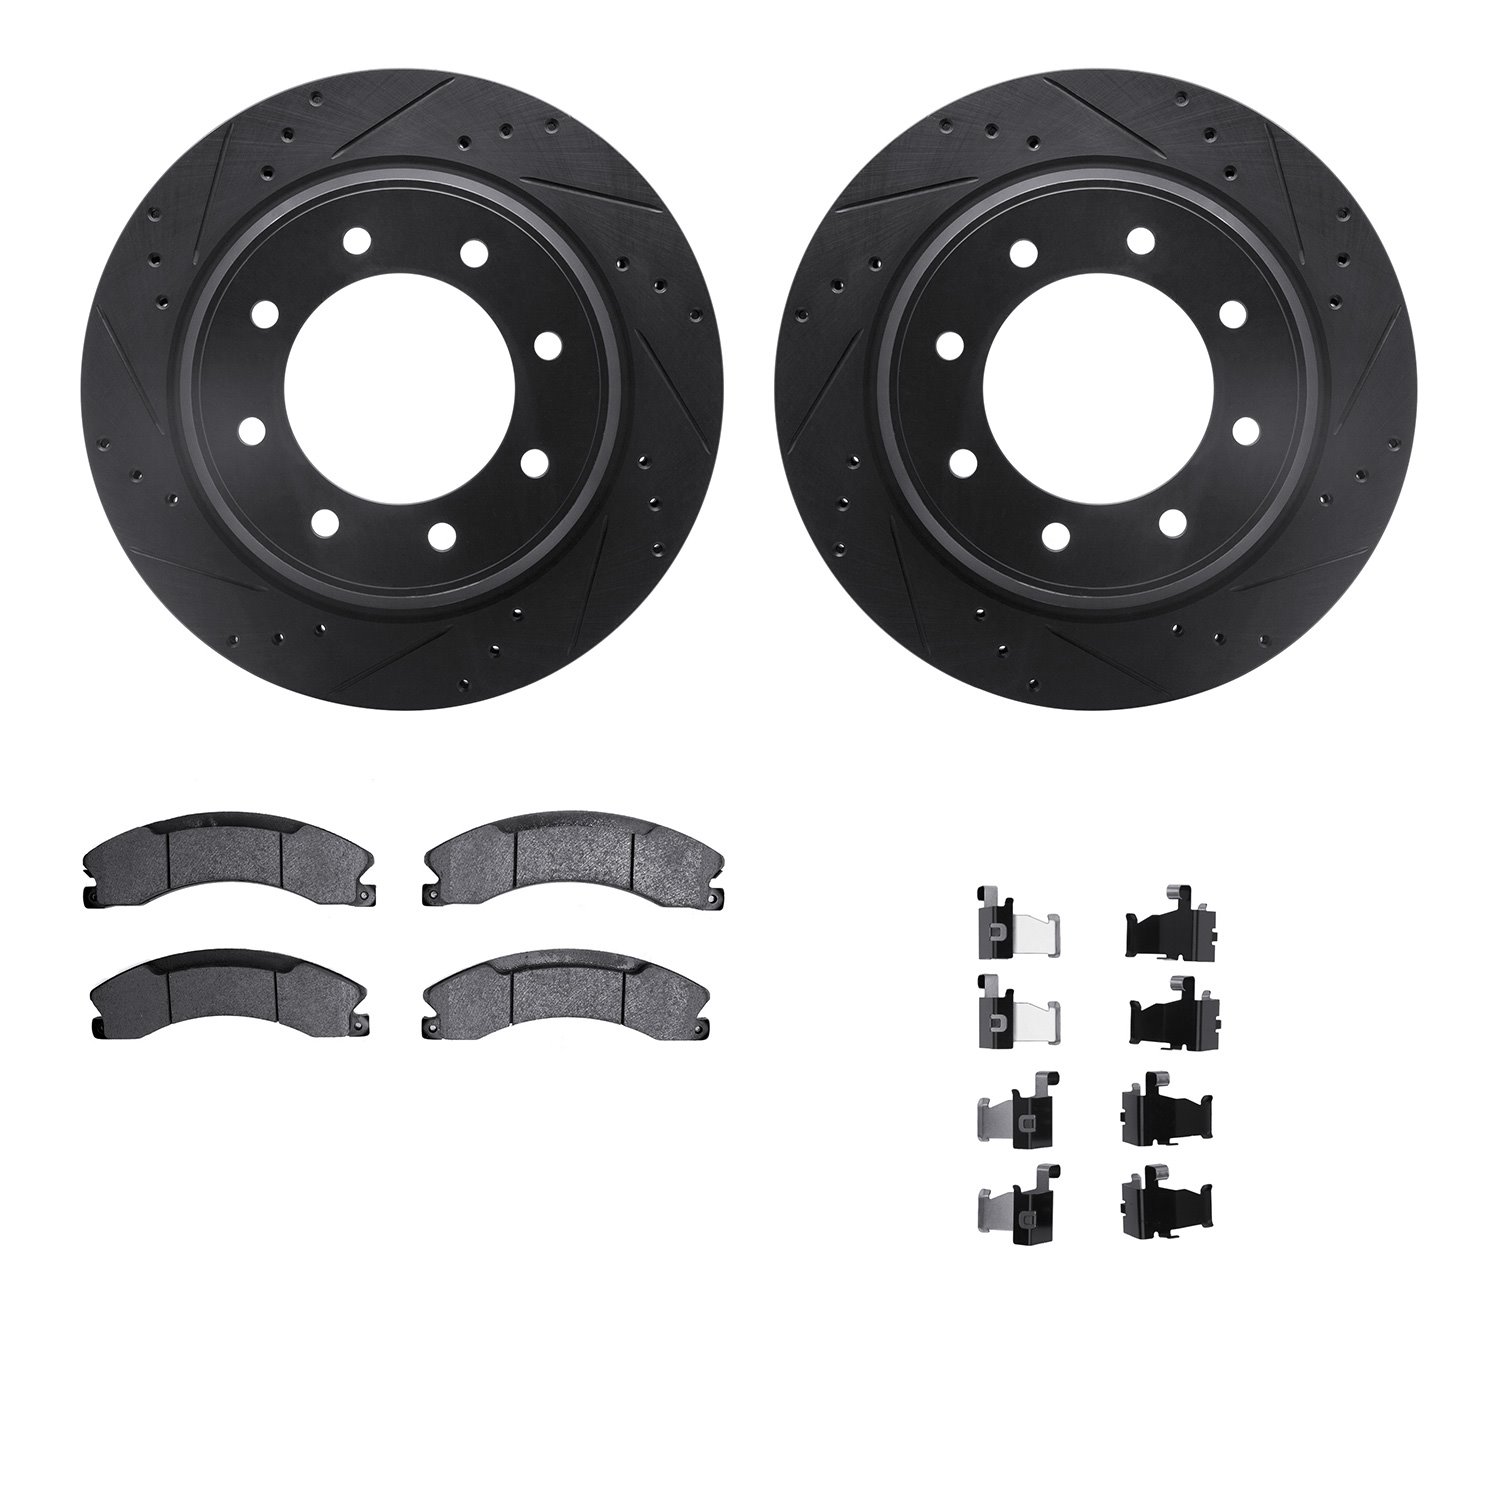 8412-67006 Drilled/Slotted Brake Rotors with Ultimate-Duty Brake Pads Kit & Hardware [Black], 2012-2021 Infiniti/Nissan, Positio